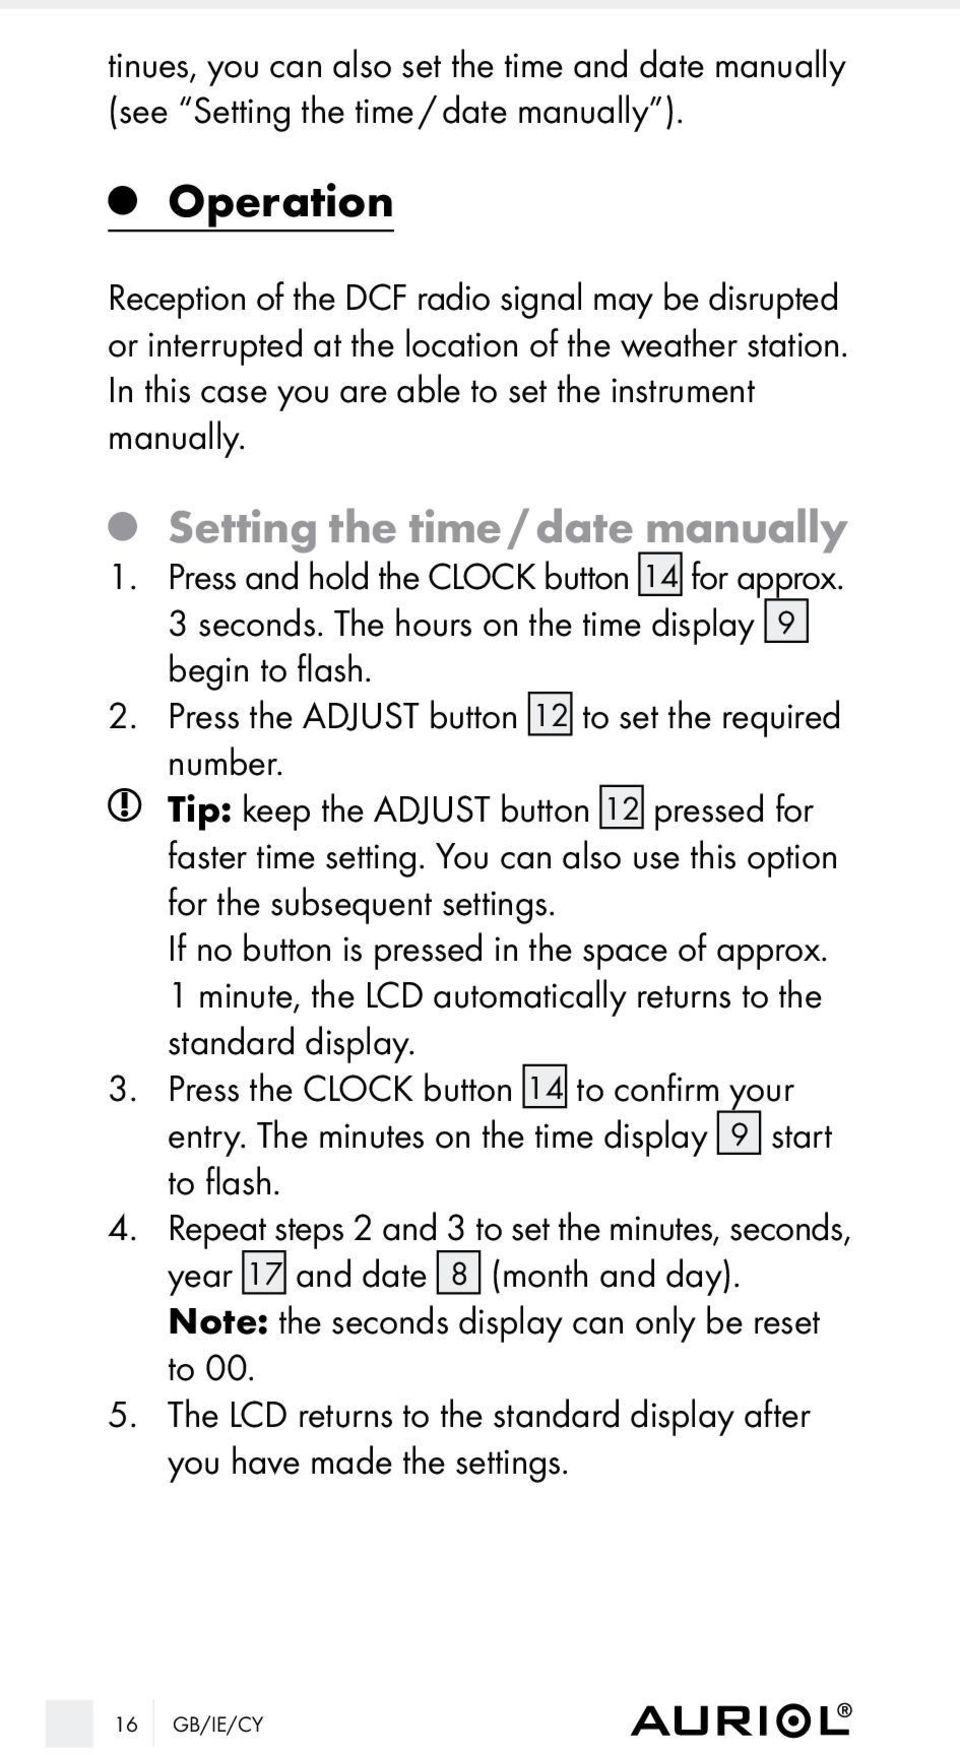 Setting the time / date manually 1. Press and hold the CLOCK button 14 for approx. 3 seconds. The hours on the time display 9 begin to flash. 2. Press the ADJUST button 12 to set the required number.